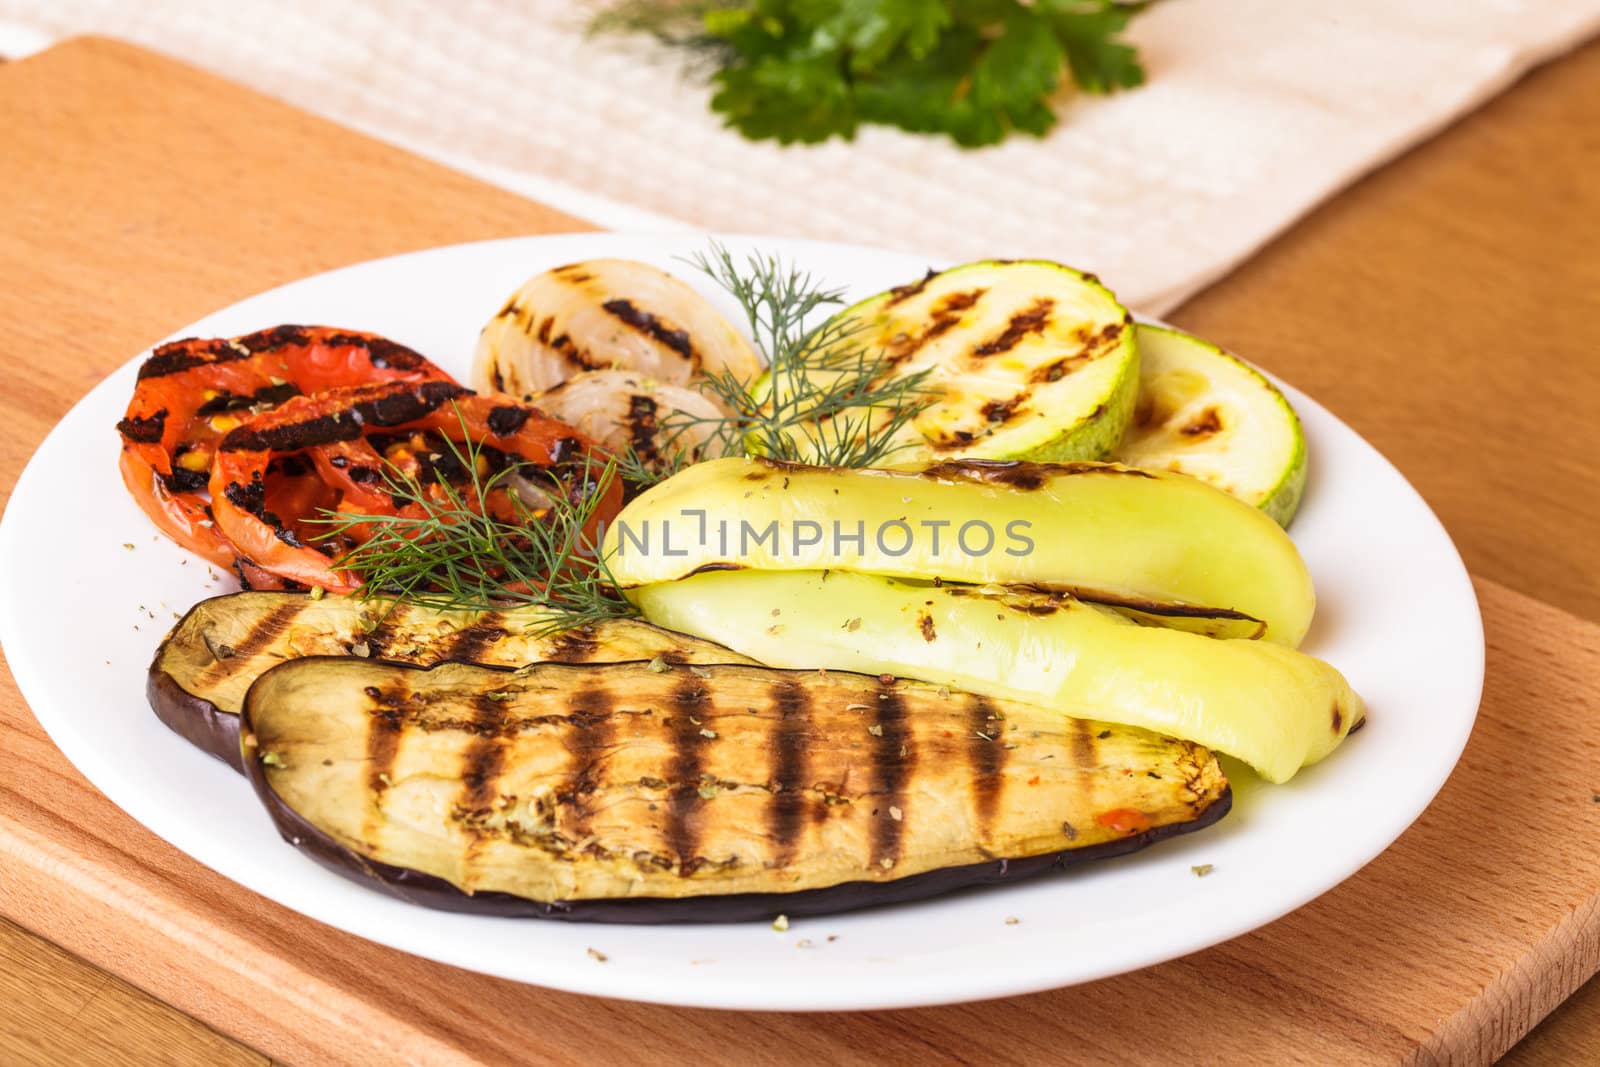 Grilled vegetables: eggplant, squash, tomato and onion